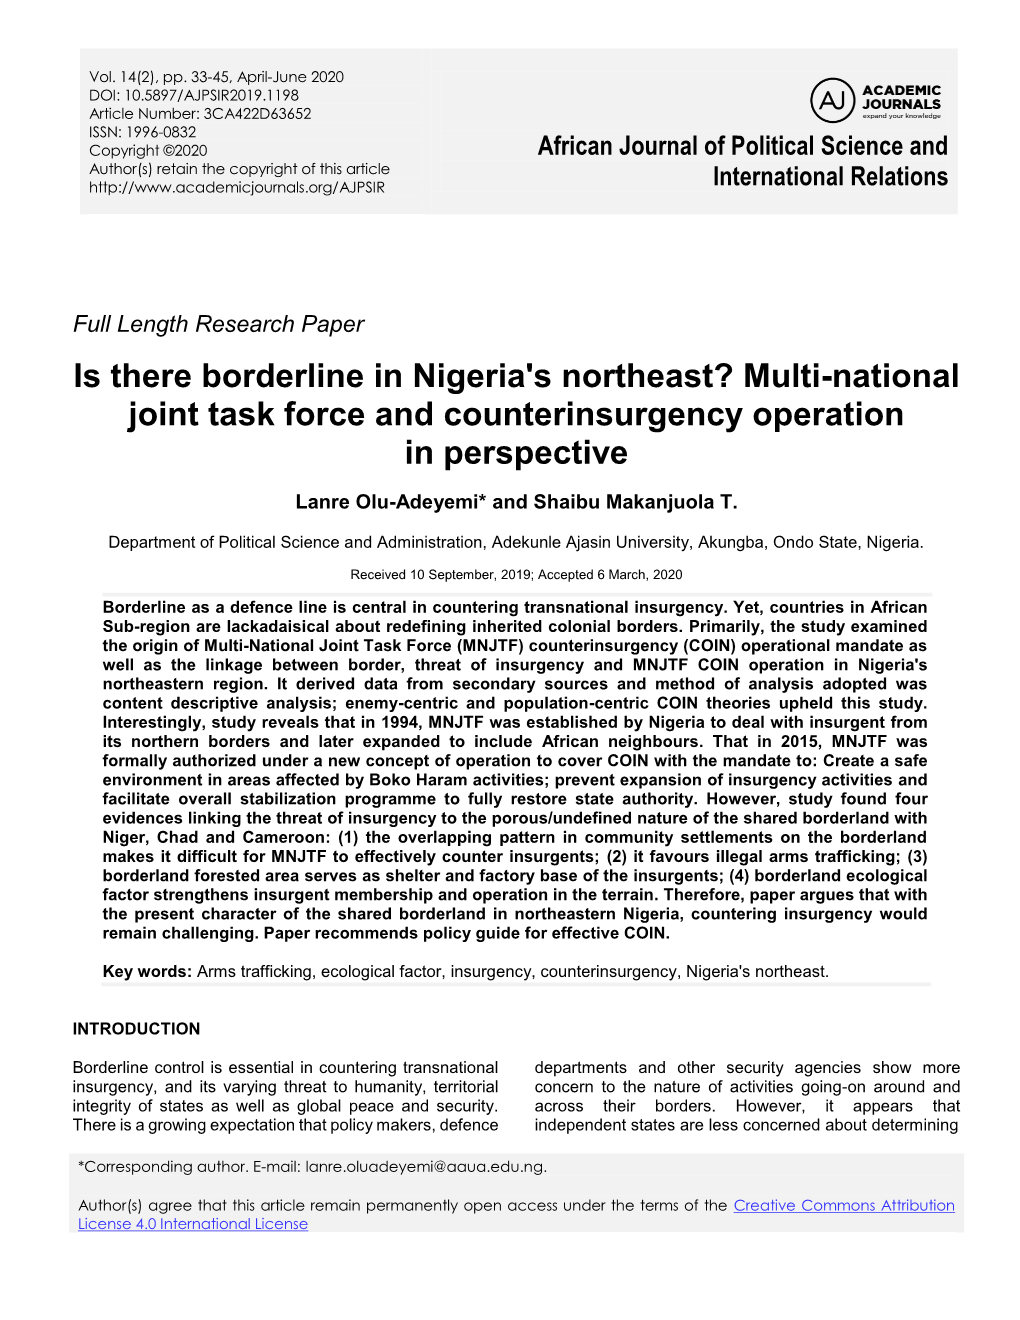 Is There Borderline in Nigeria's Northeast? Multi-National Joint Task Force and Counterinsurgency Operation in Perspective